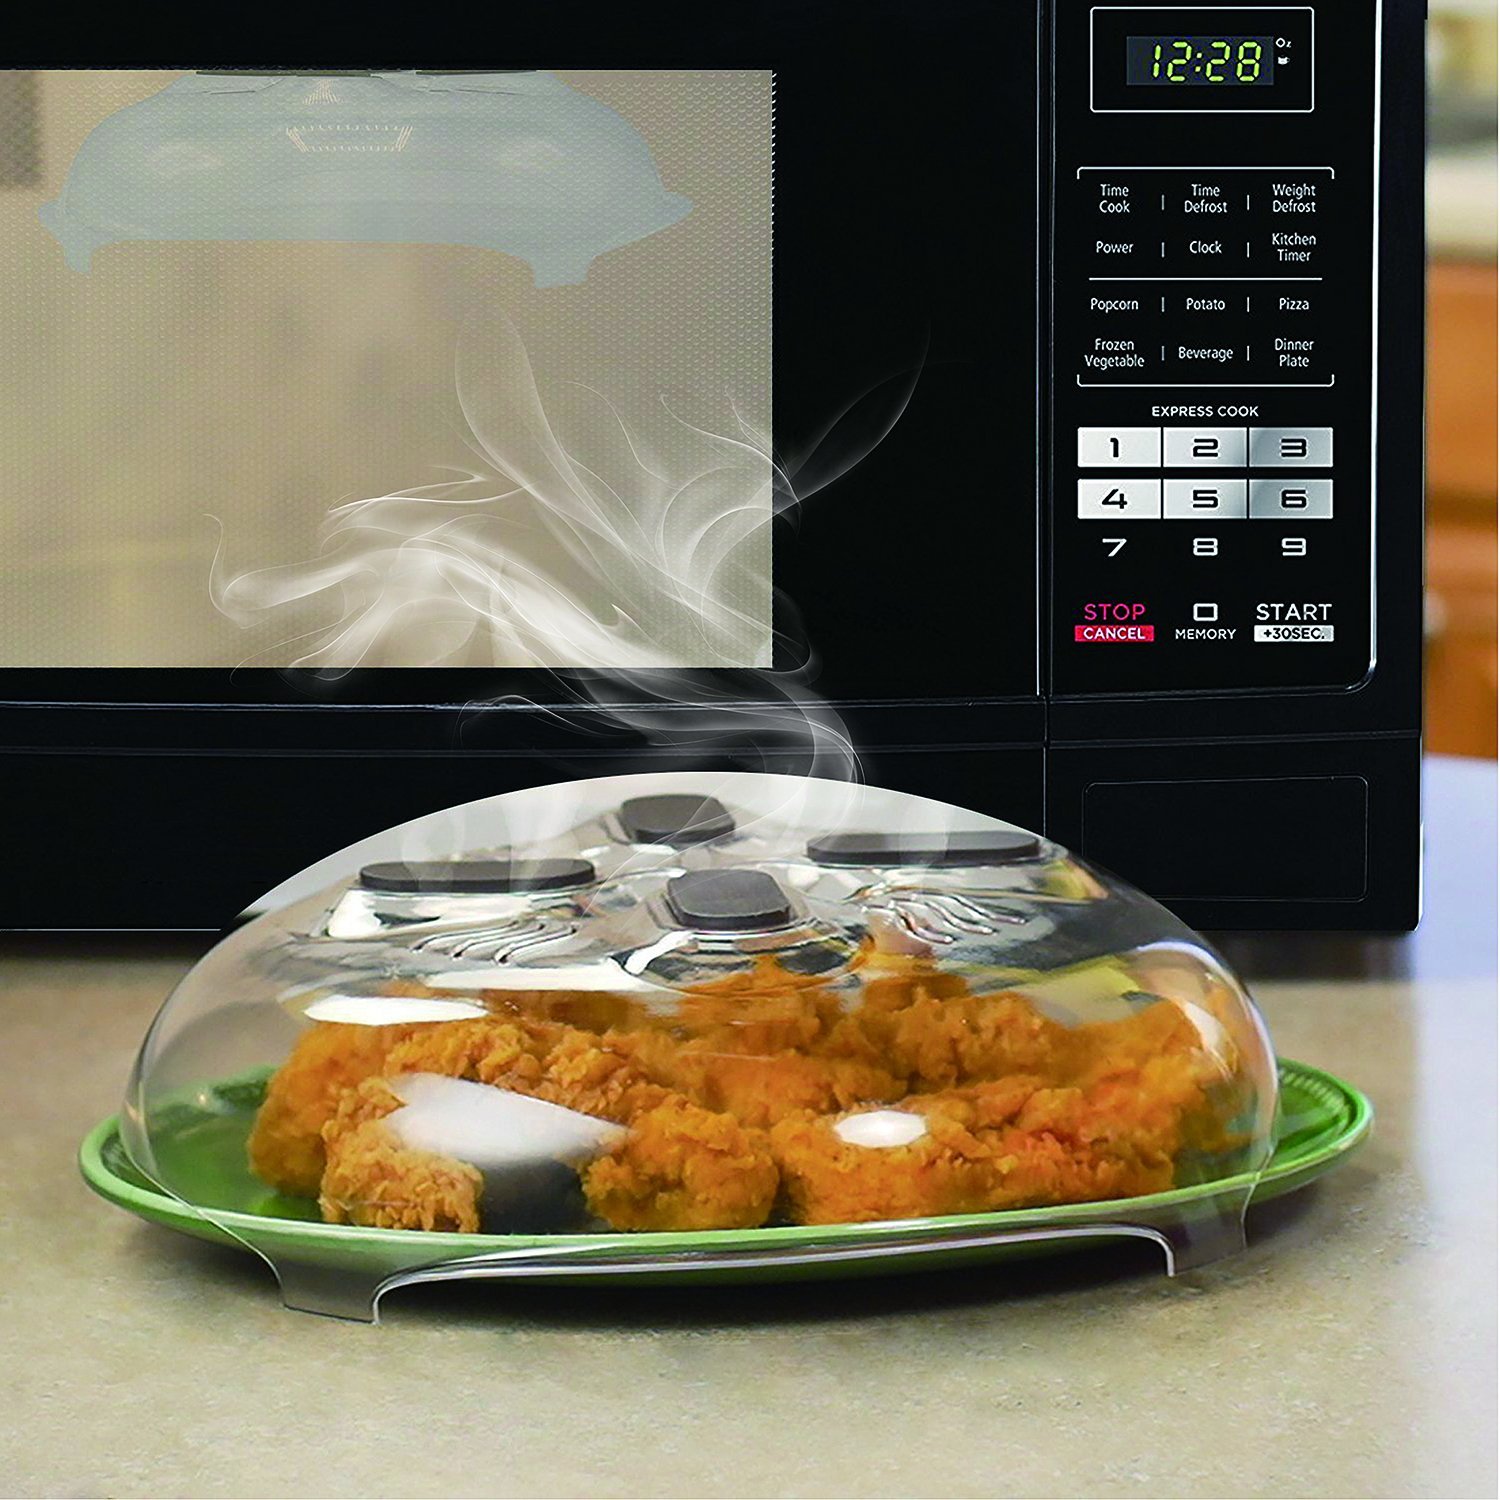 

Microwave Hover Anti-Sputtering Cover New Food Splatter Guard Microwave Splatter Lid with Steam Vents 11.5 Inch